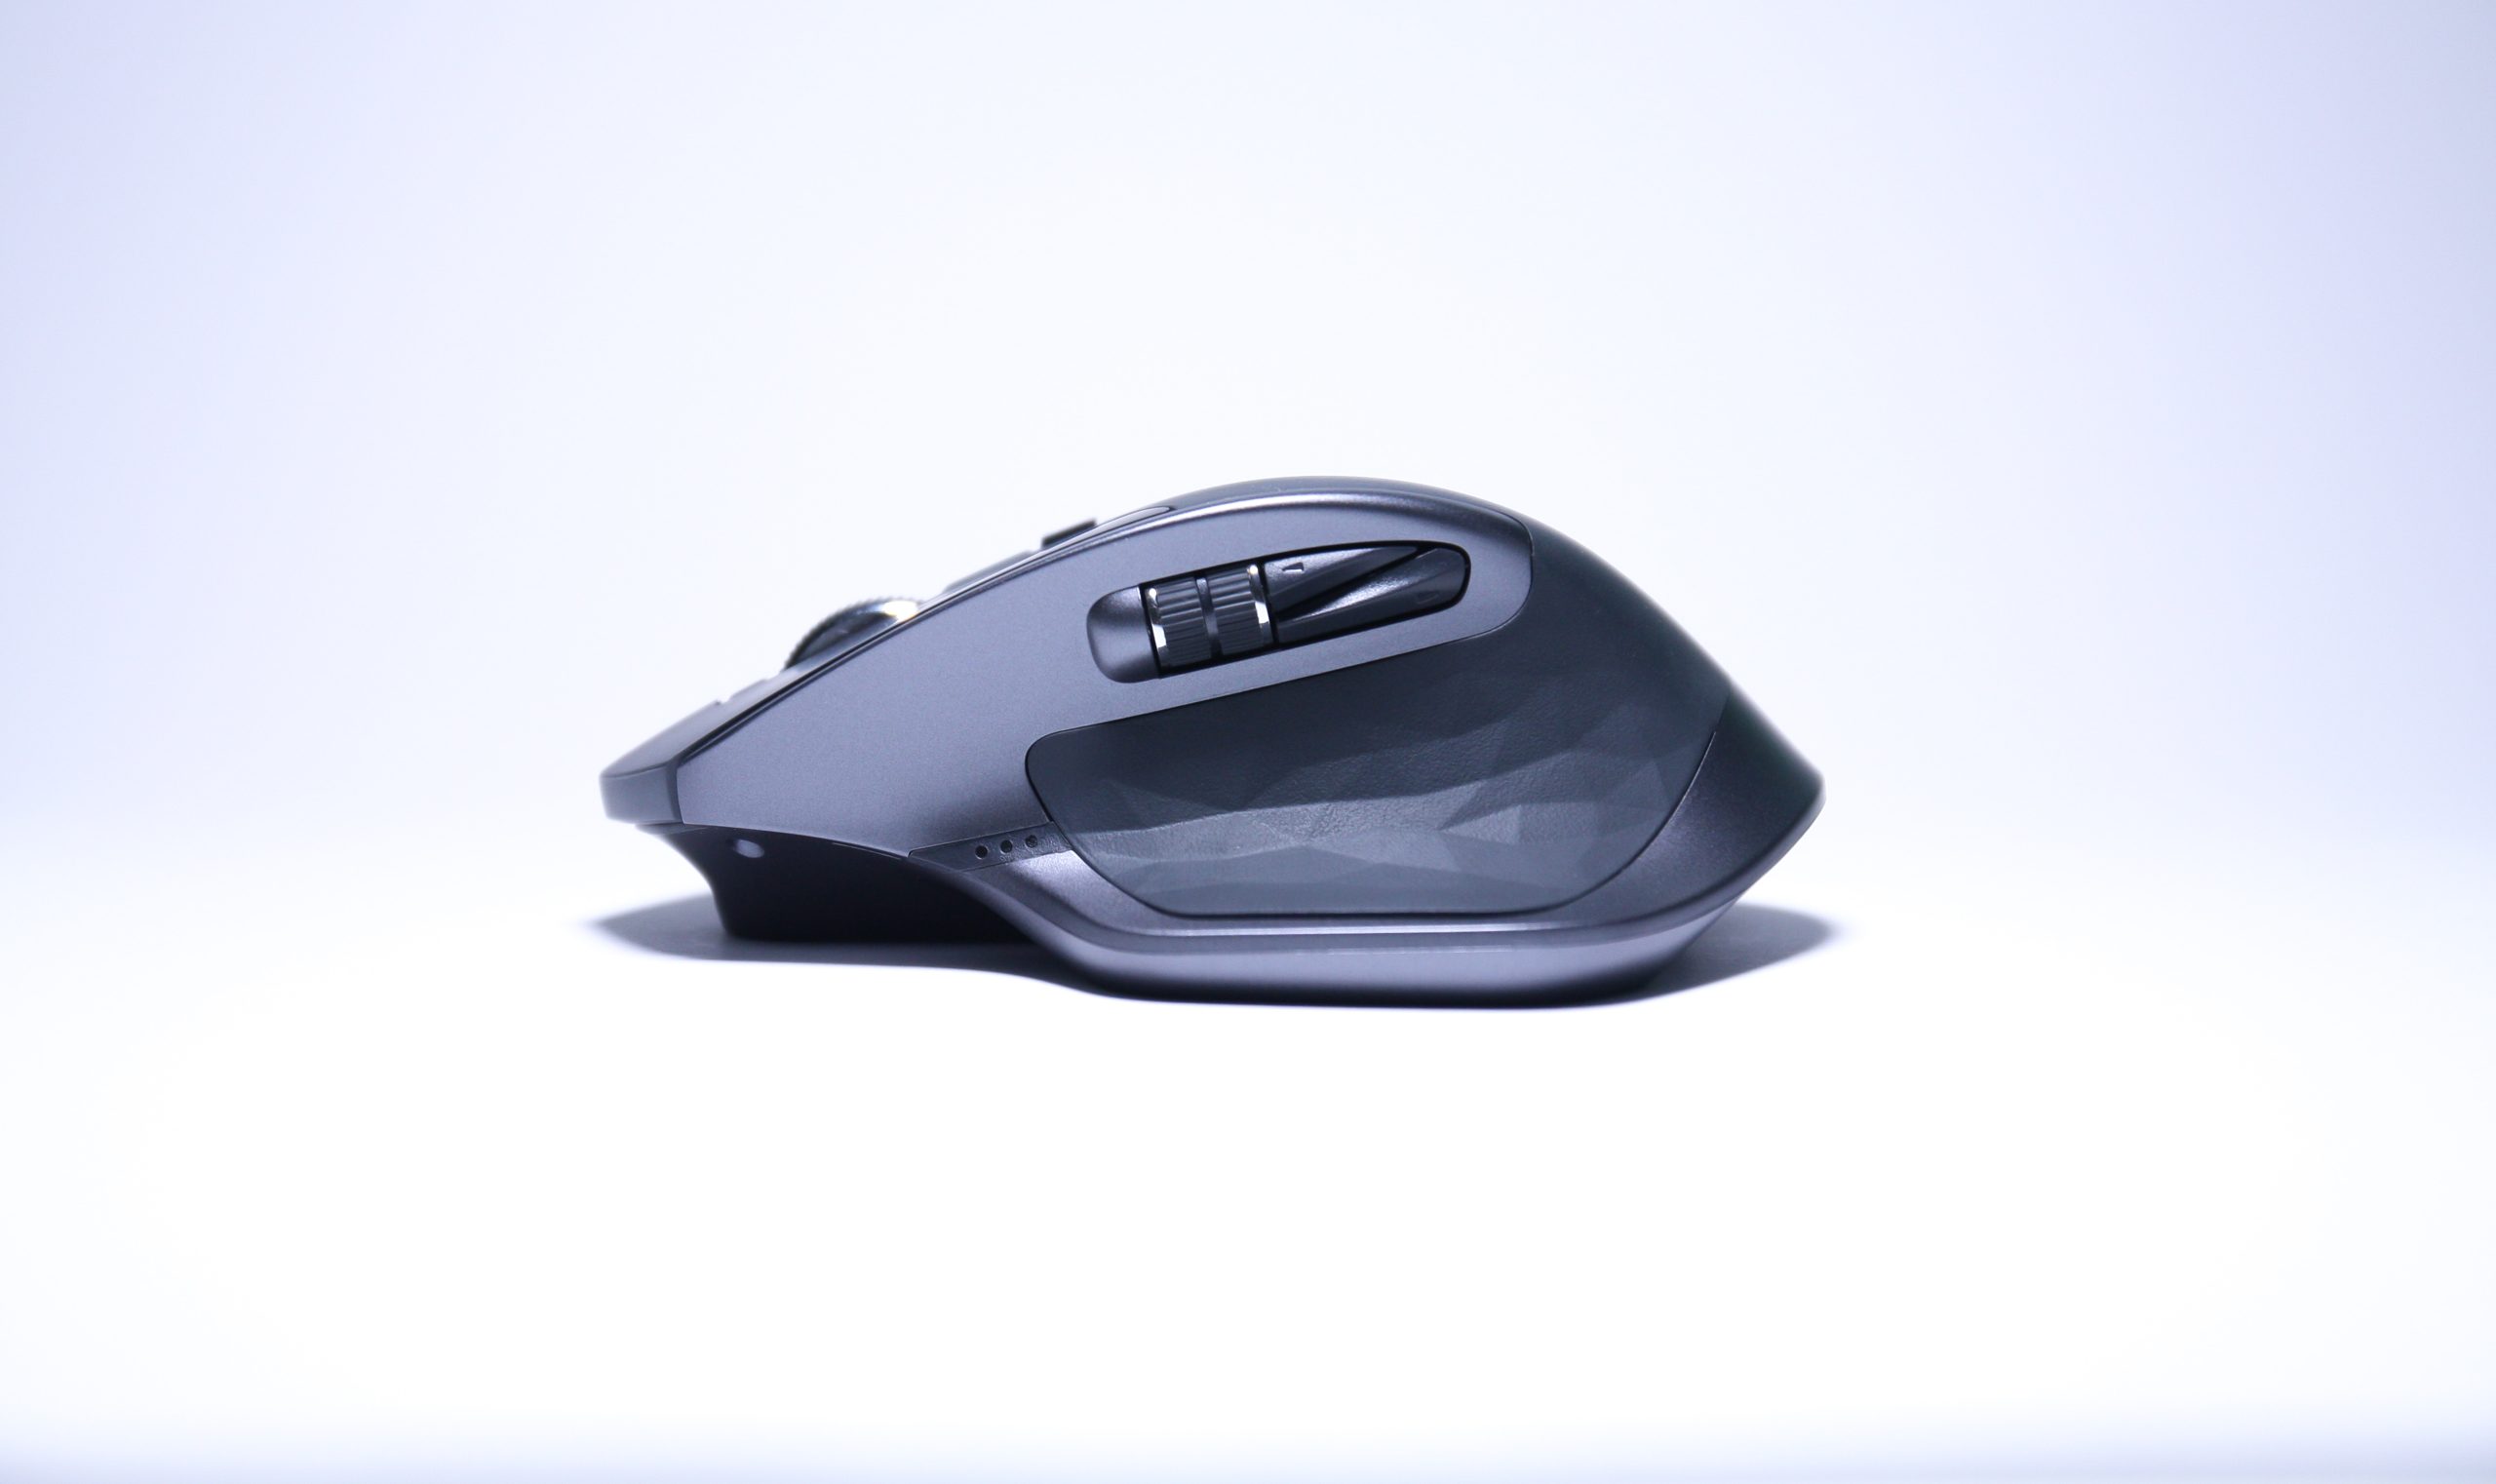 How To Test The Quality Of A Mouse?